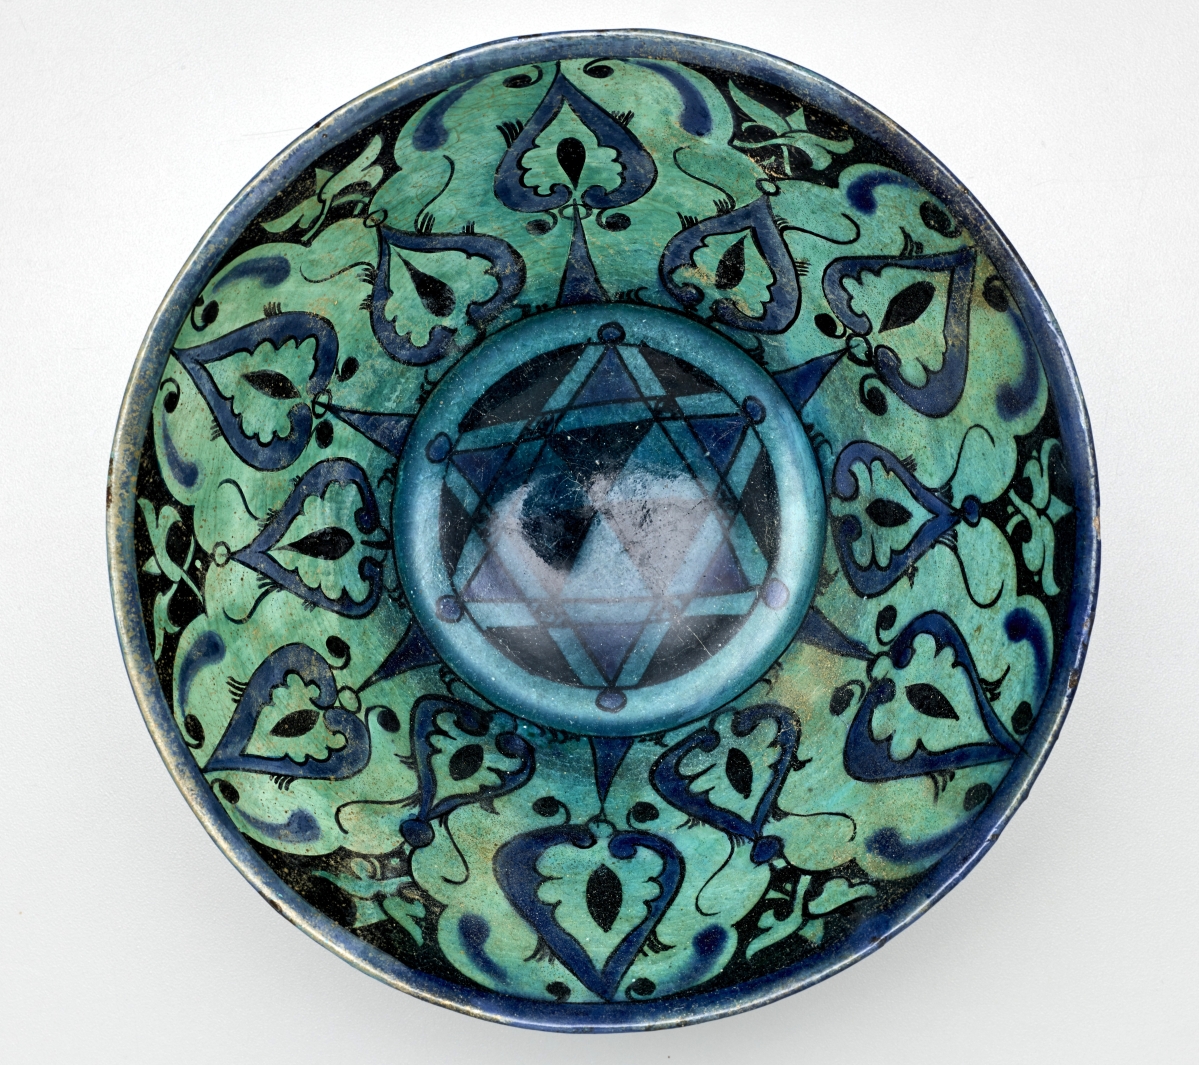 Bowl, Iran, Thirteenth Century, ceramic, overall 4-  by 9-  by 9-  inches.